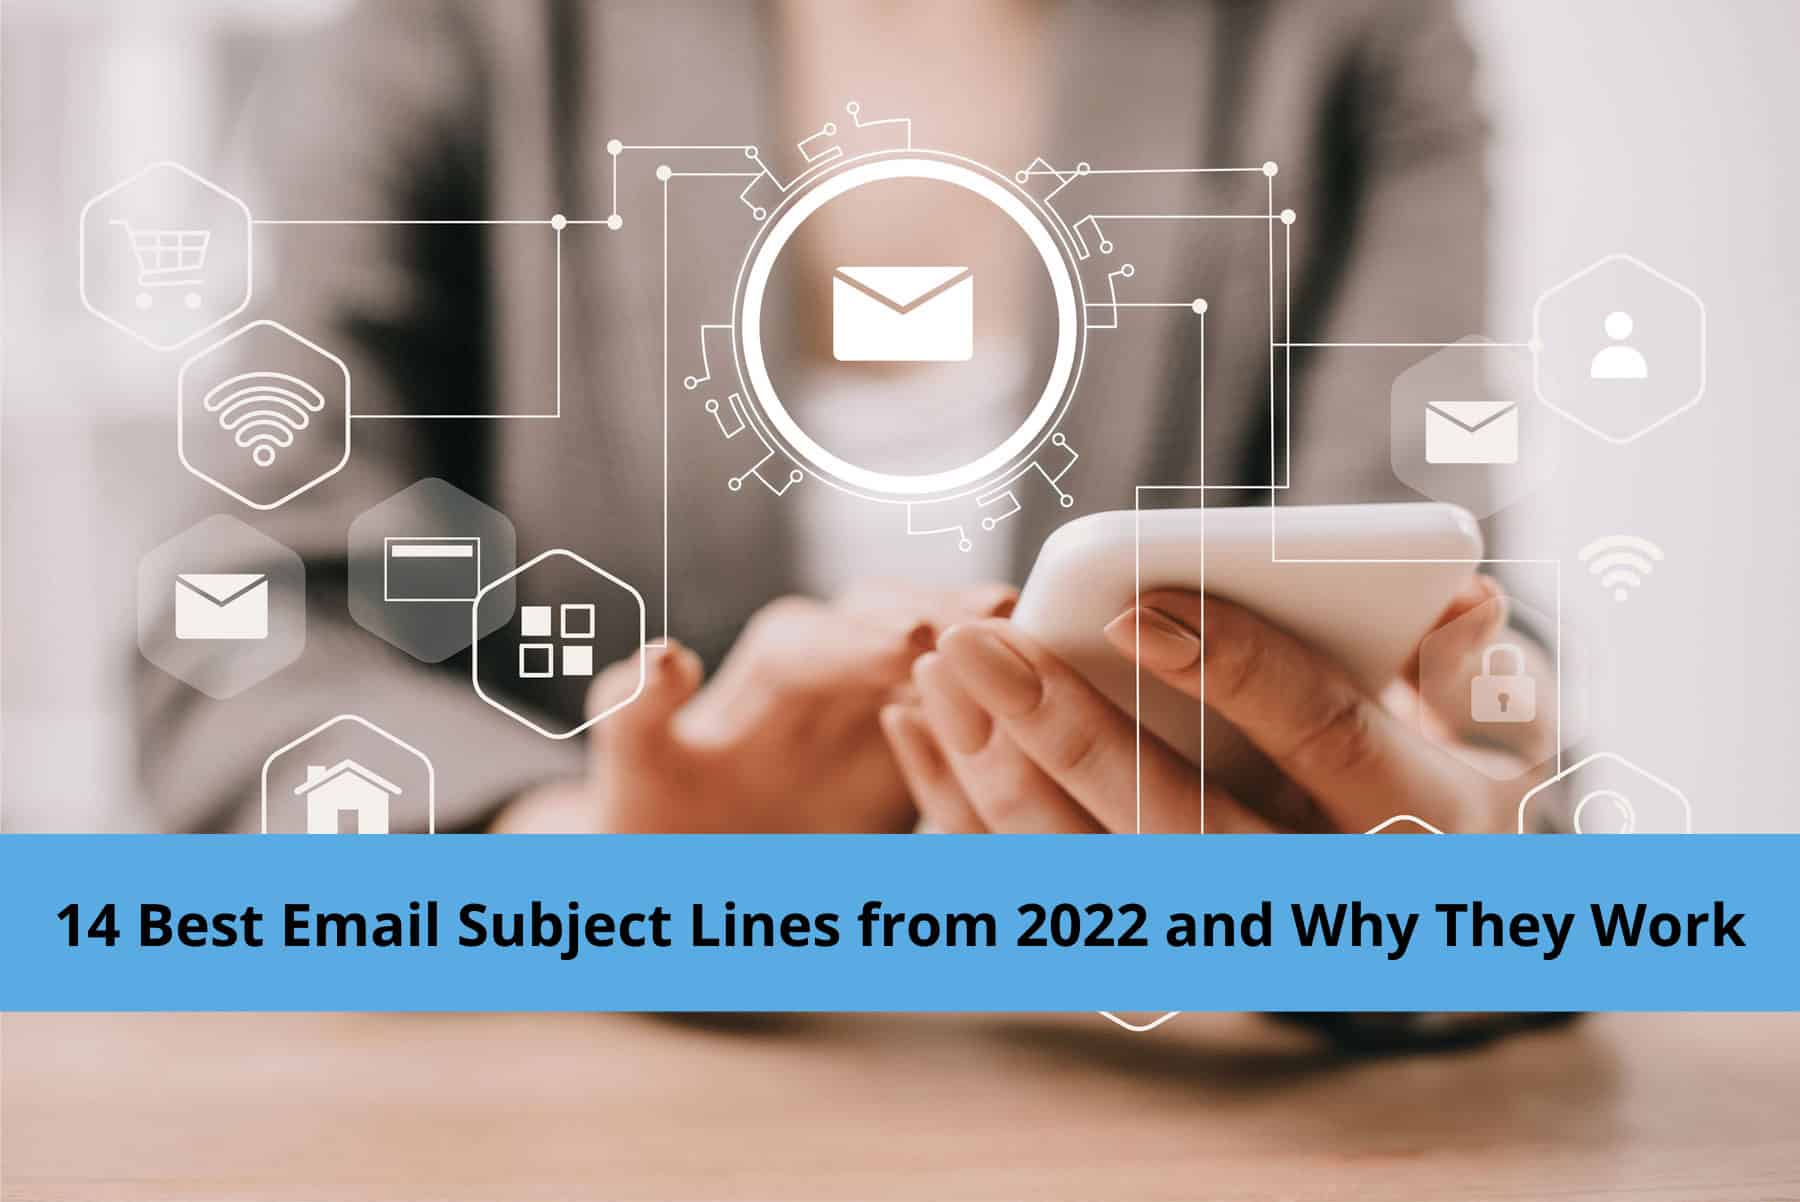 14 Best Email Subject Lines from 2022 and Why They Work